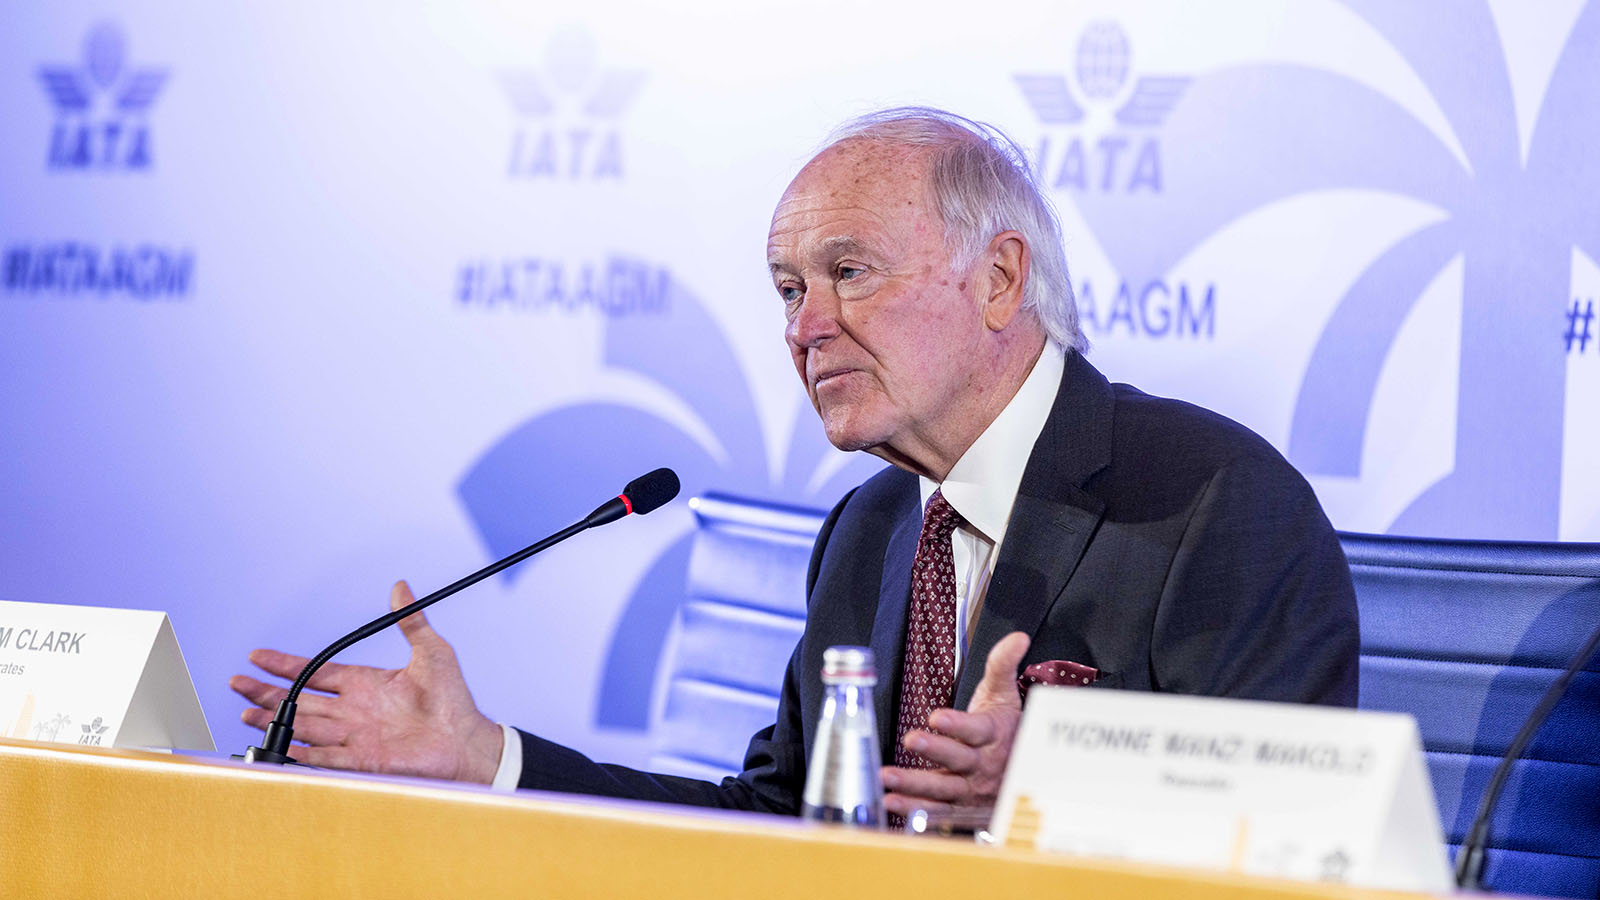 Sir Tim Clark / Emirates not threatened by single-aisle aircraft